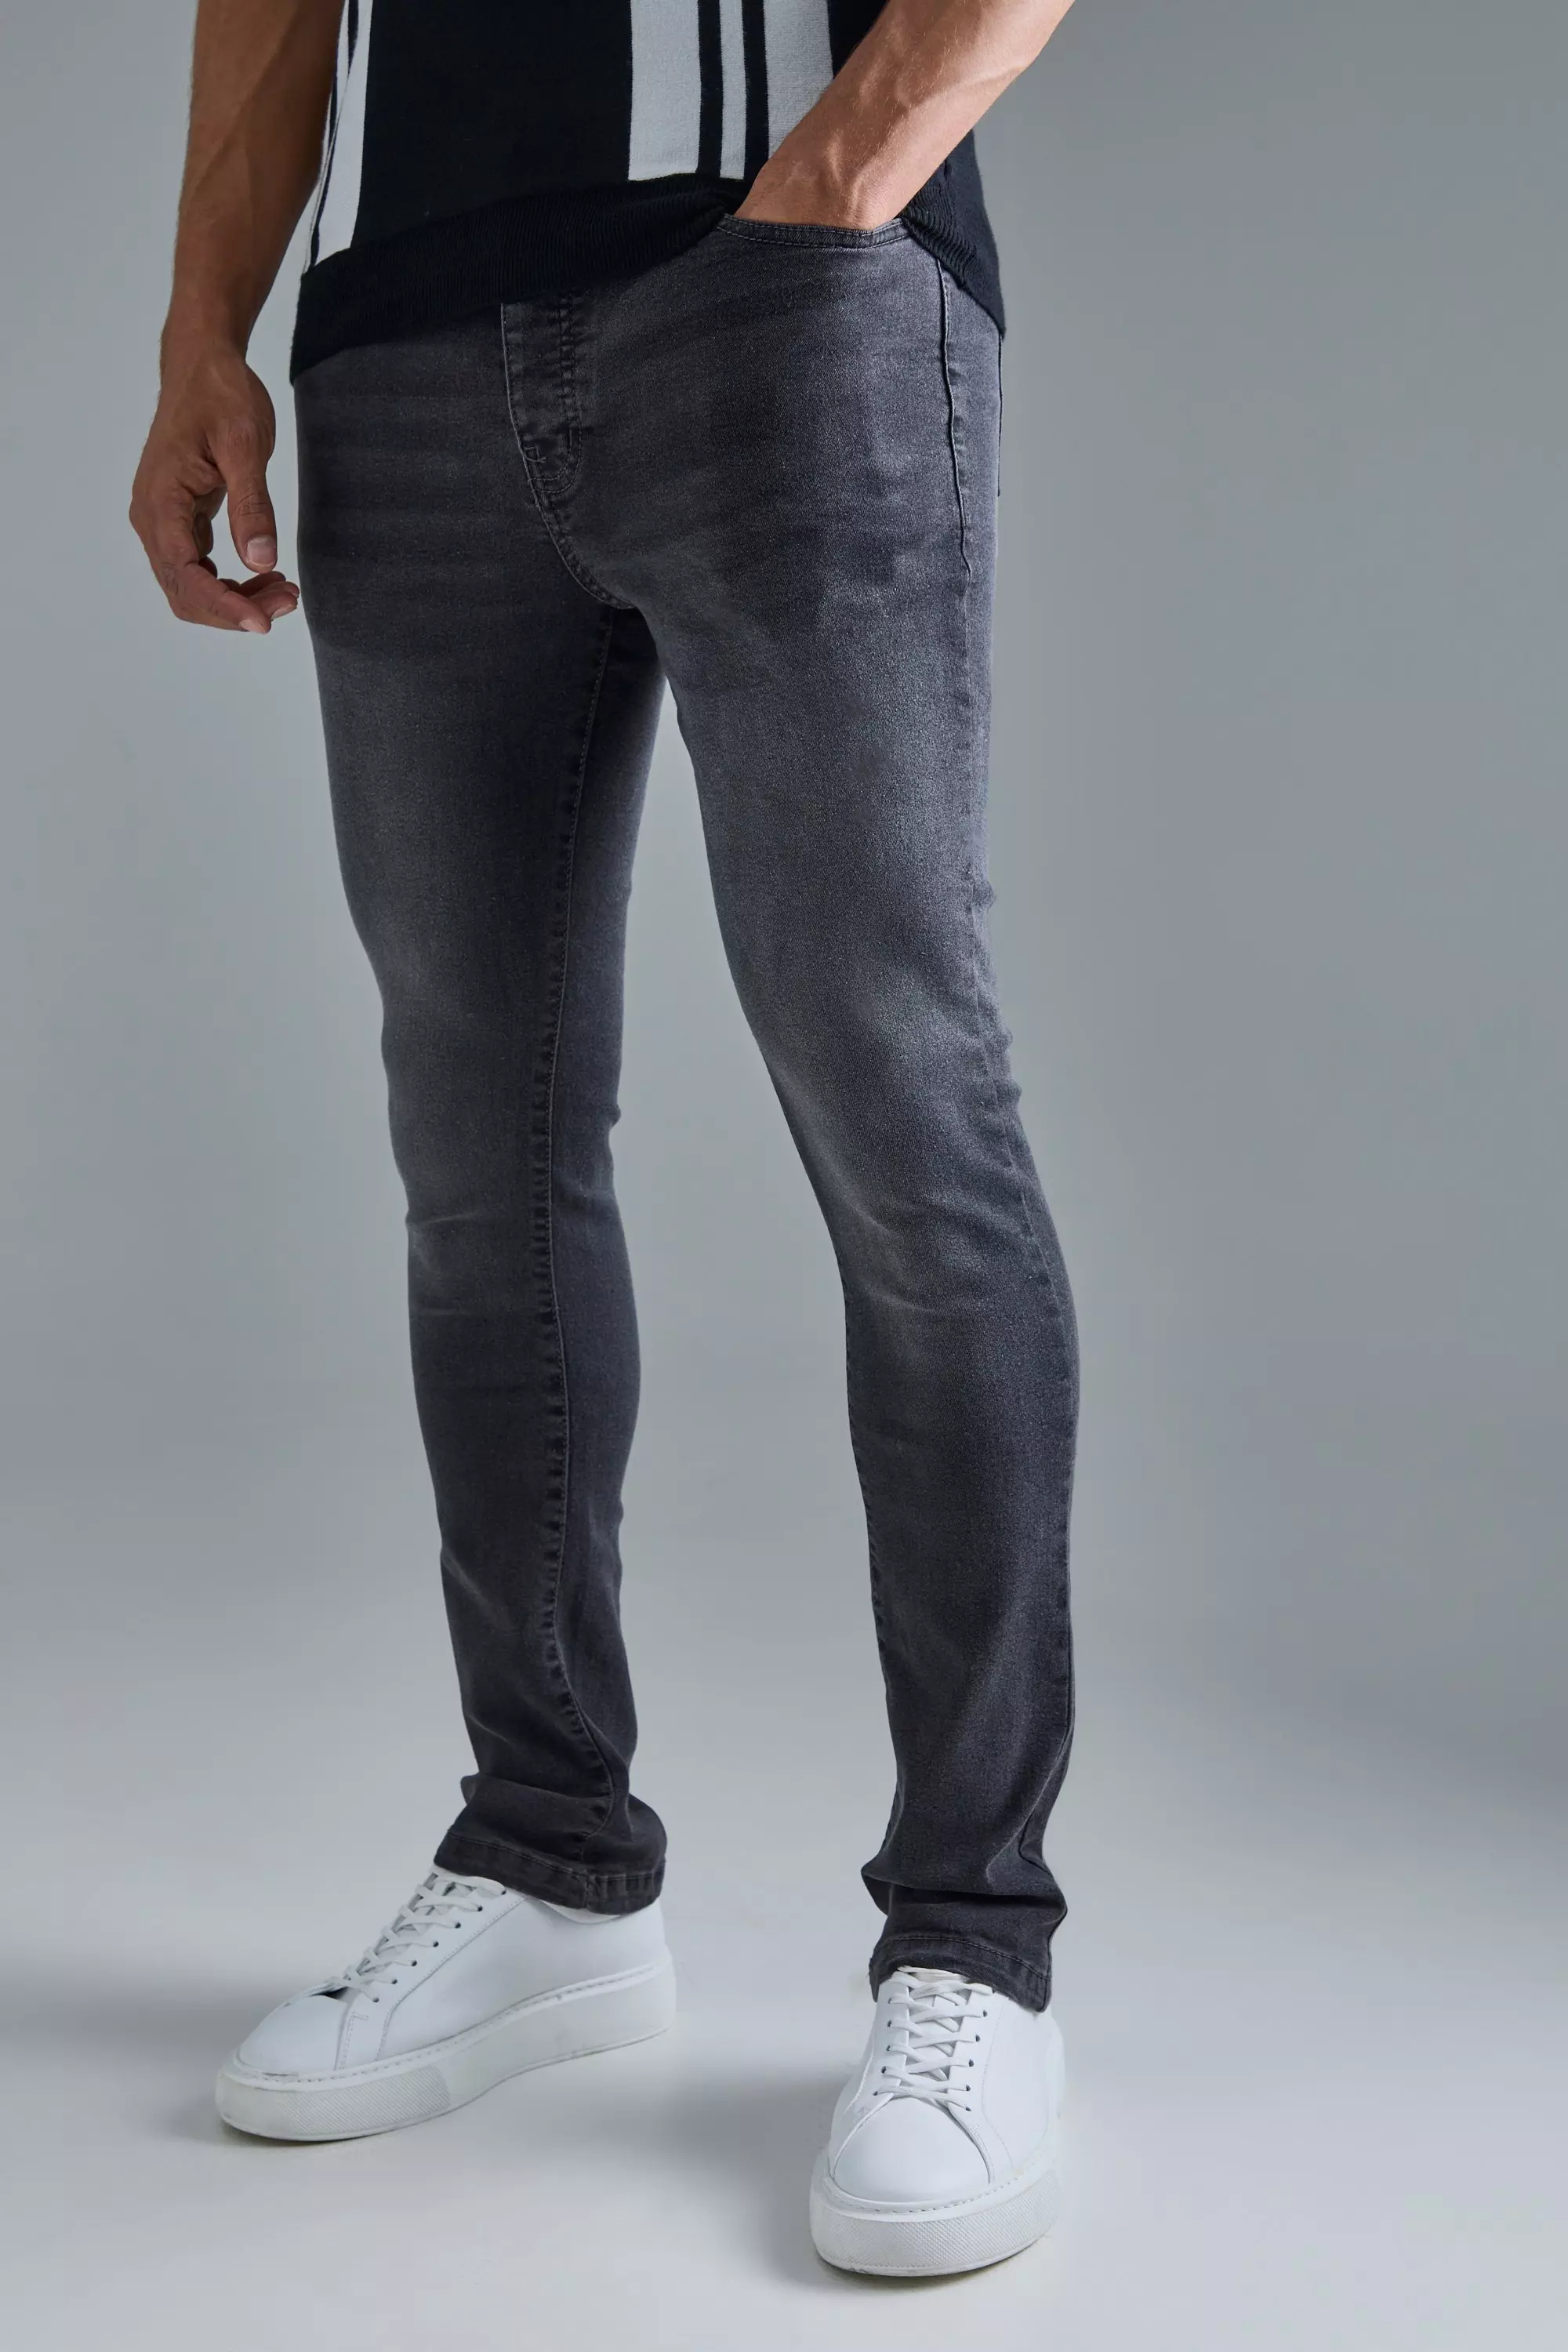 Grey Skinny Stretch Flare Jean In Charcoal